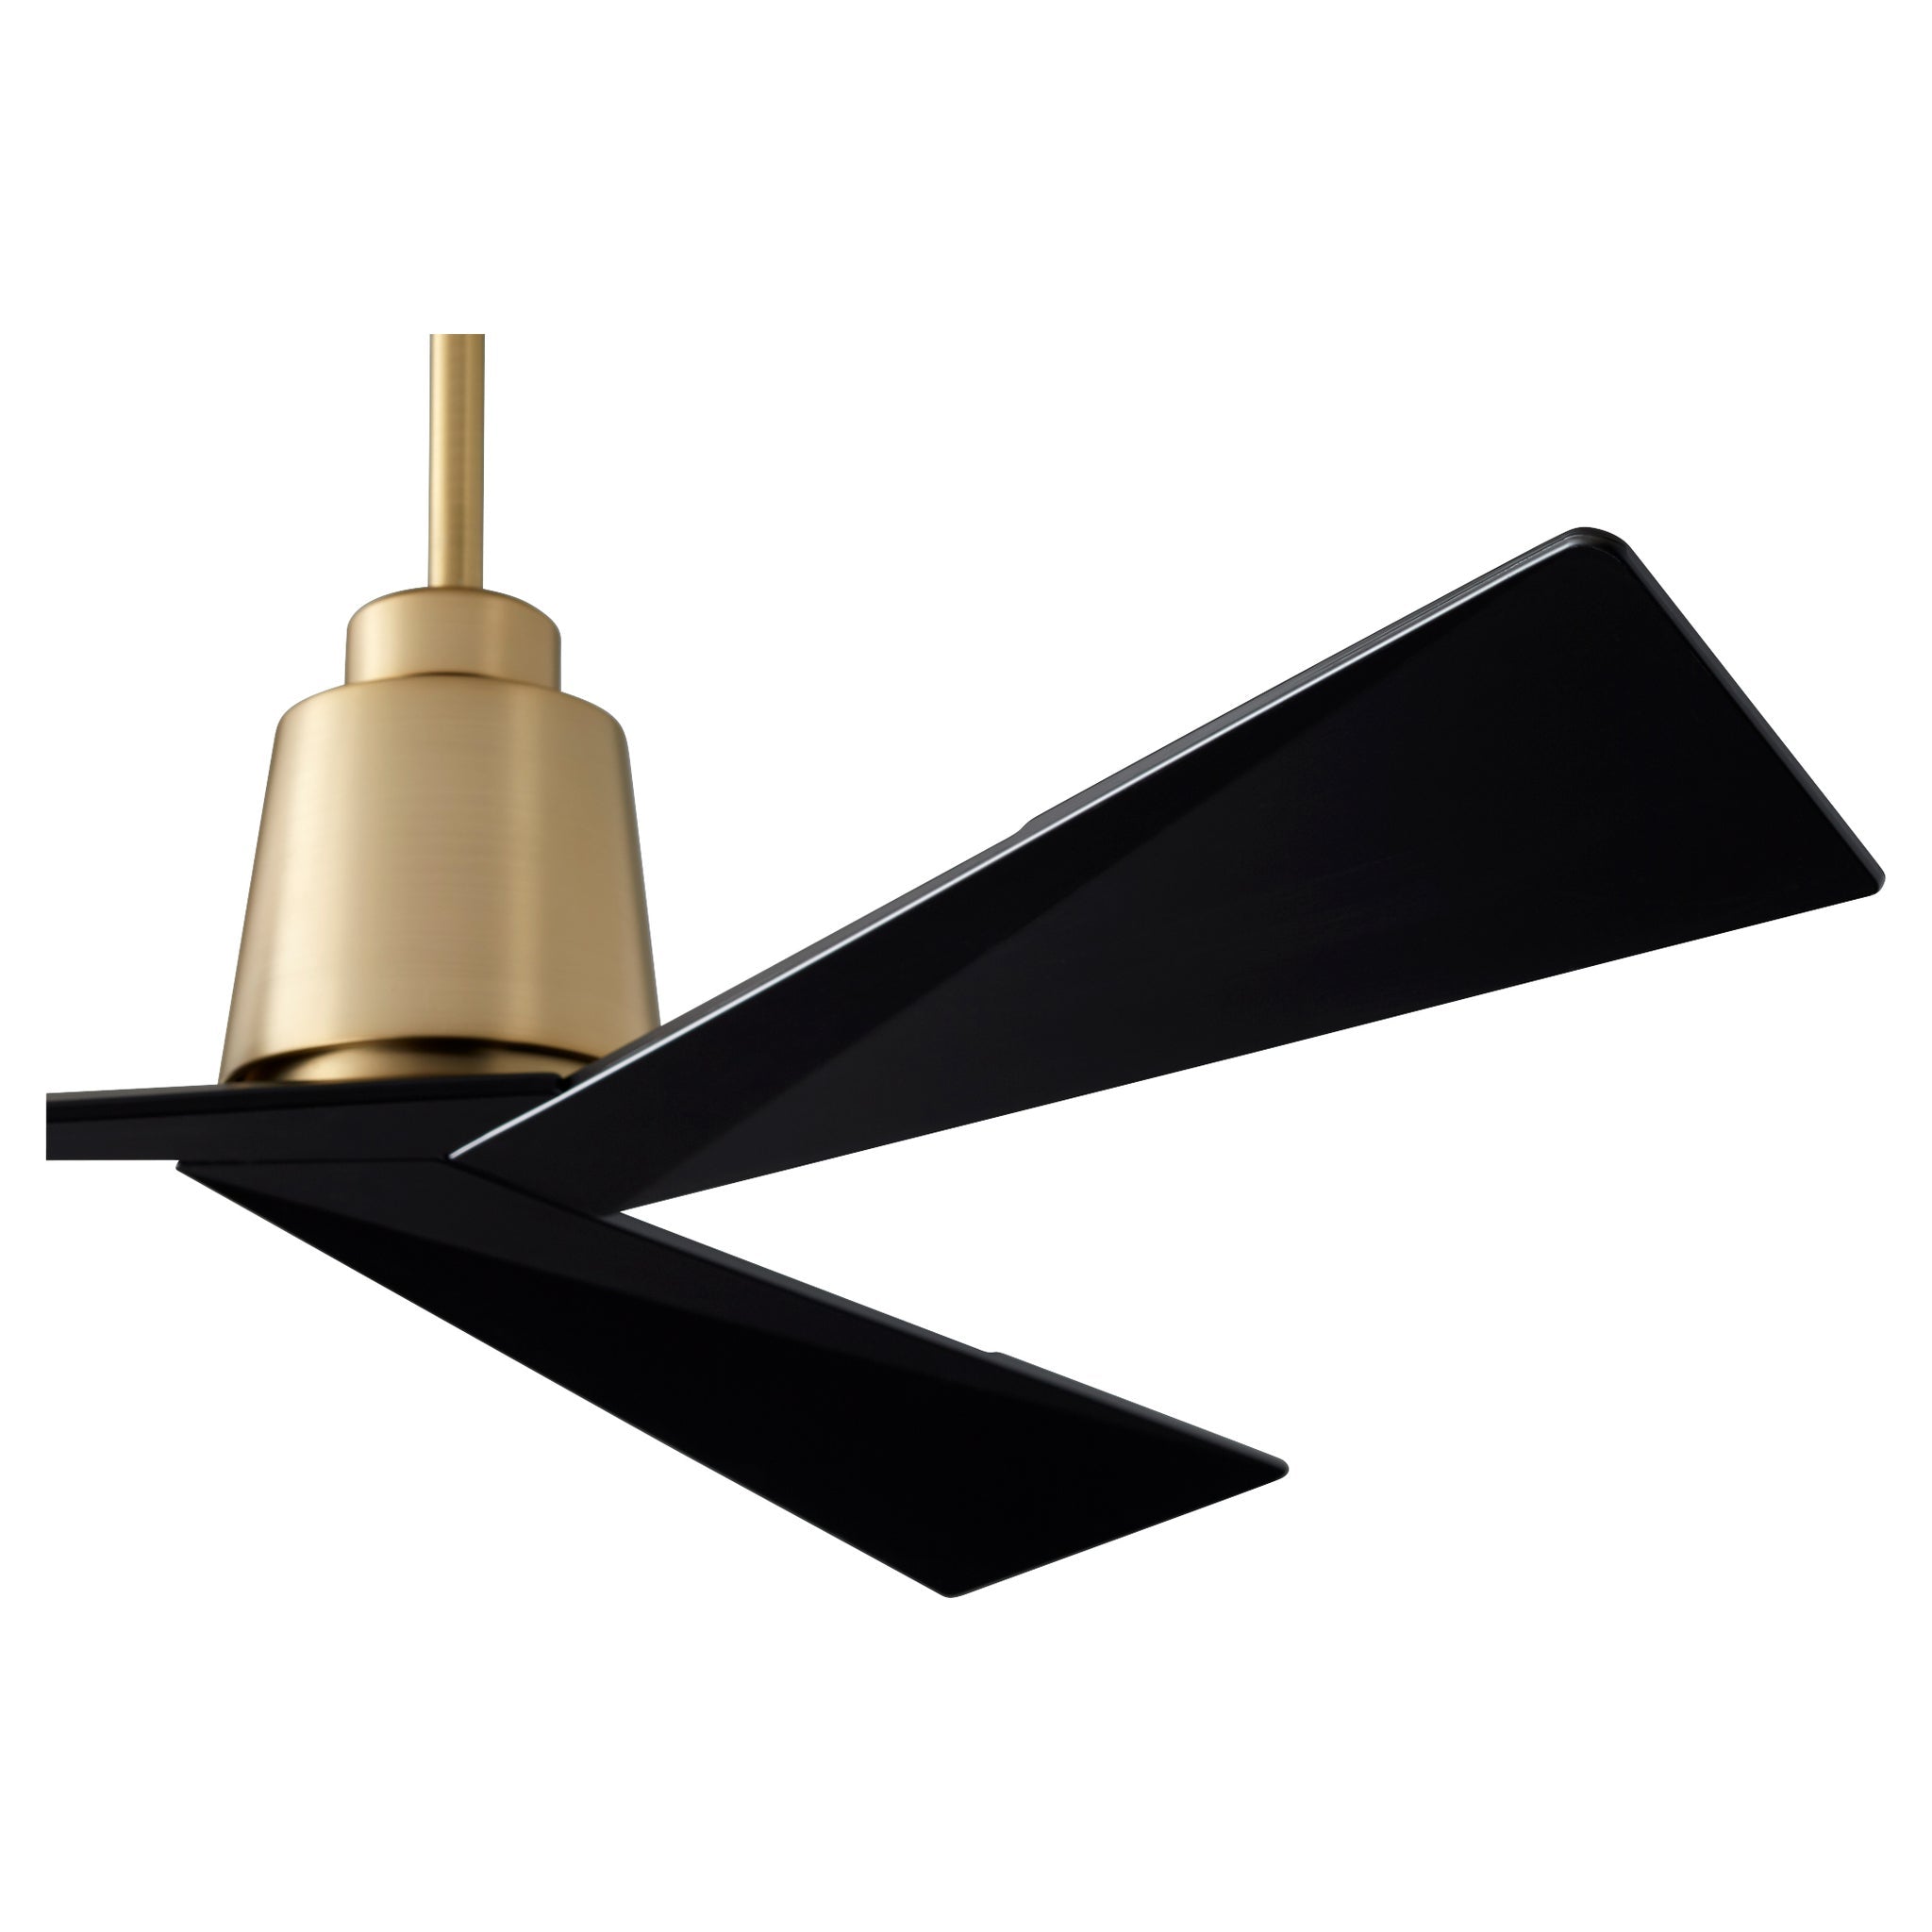 Oxygen Dynamo 3-113-1540 Contemporary Ceiling Fan with Remote, 54 Inch - Aged Brass, Black